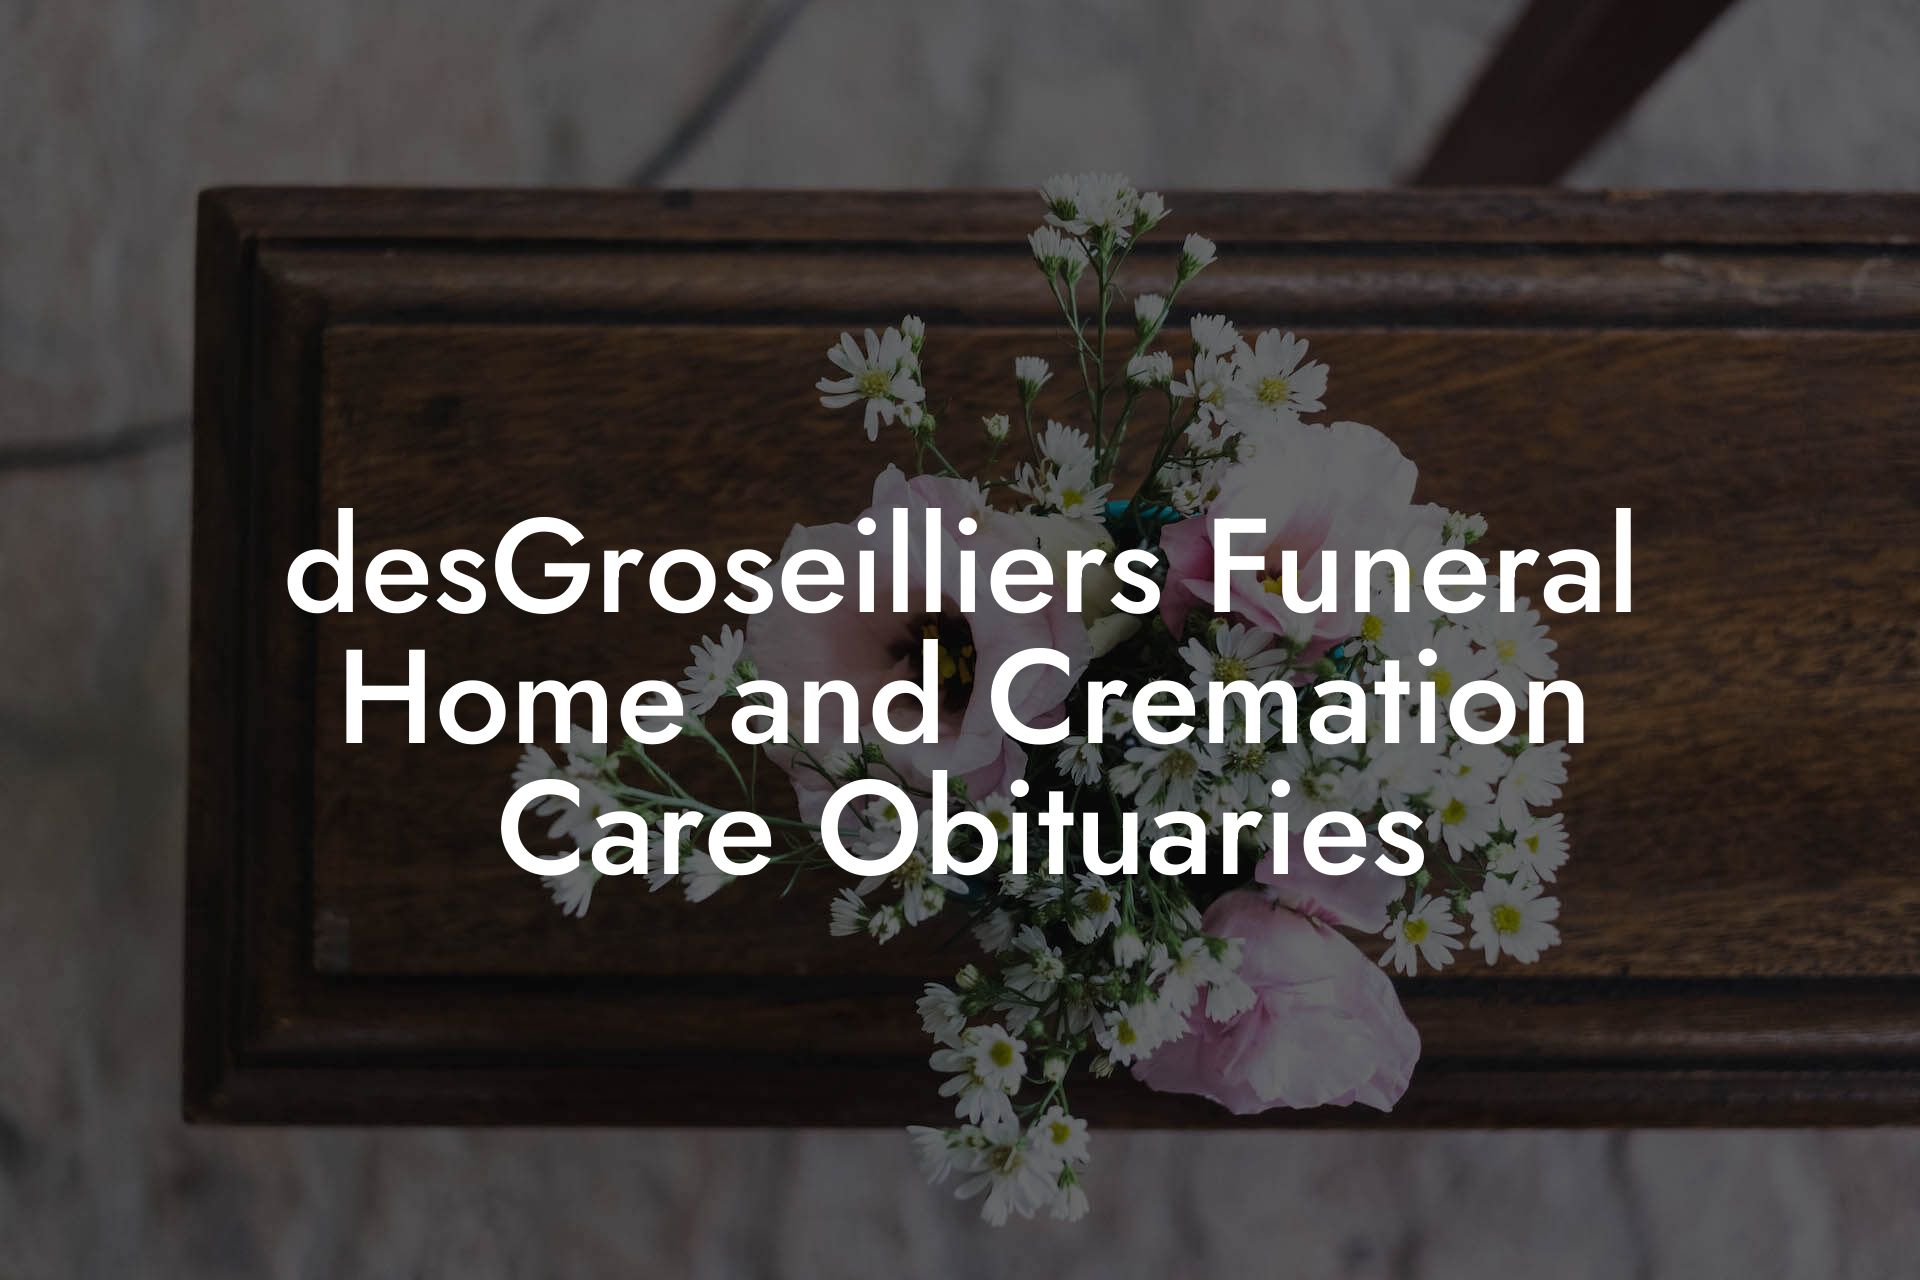 desGroseilliers Funeral Home and Cremation Care Obituaries